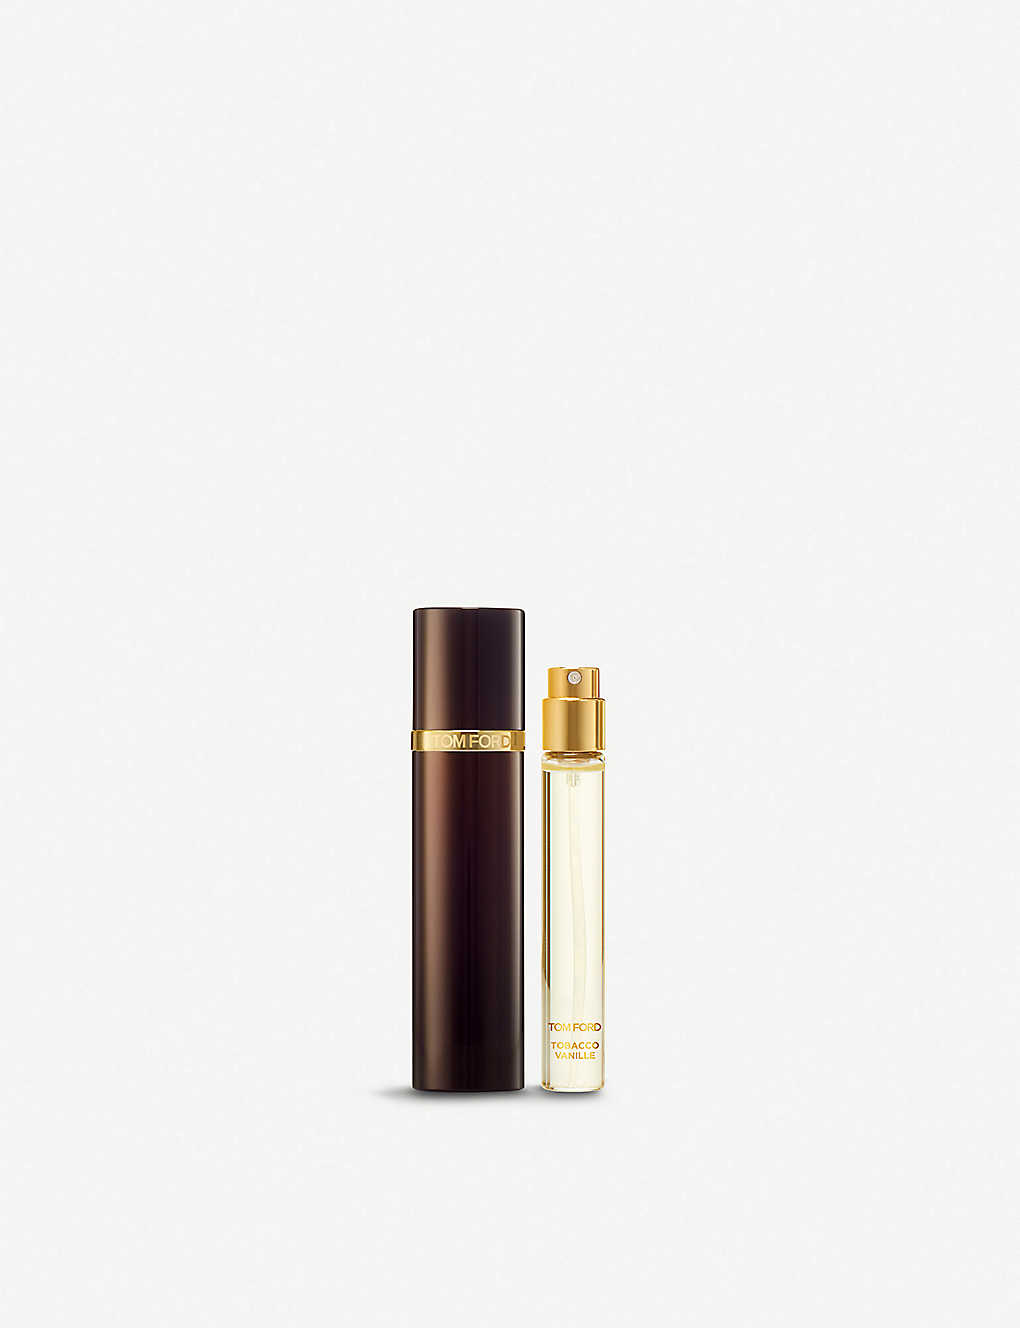 Tom Ford Private Blend Tobacco Vanille Atomizer 10ml